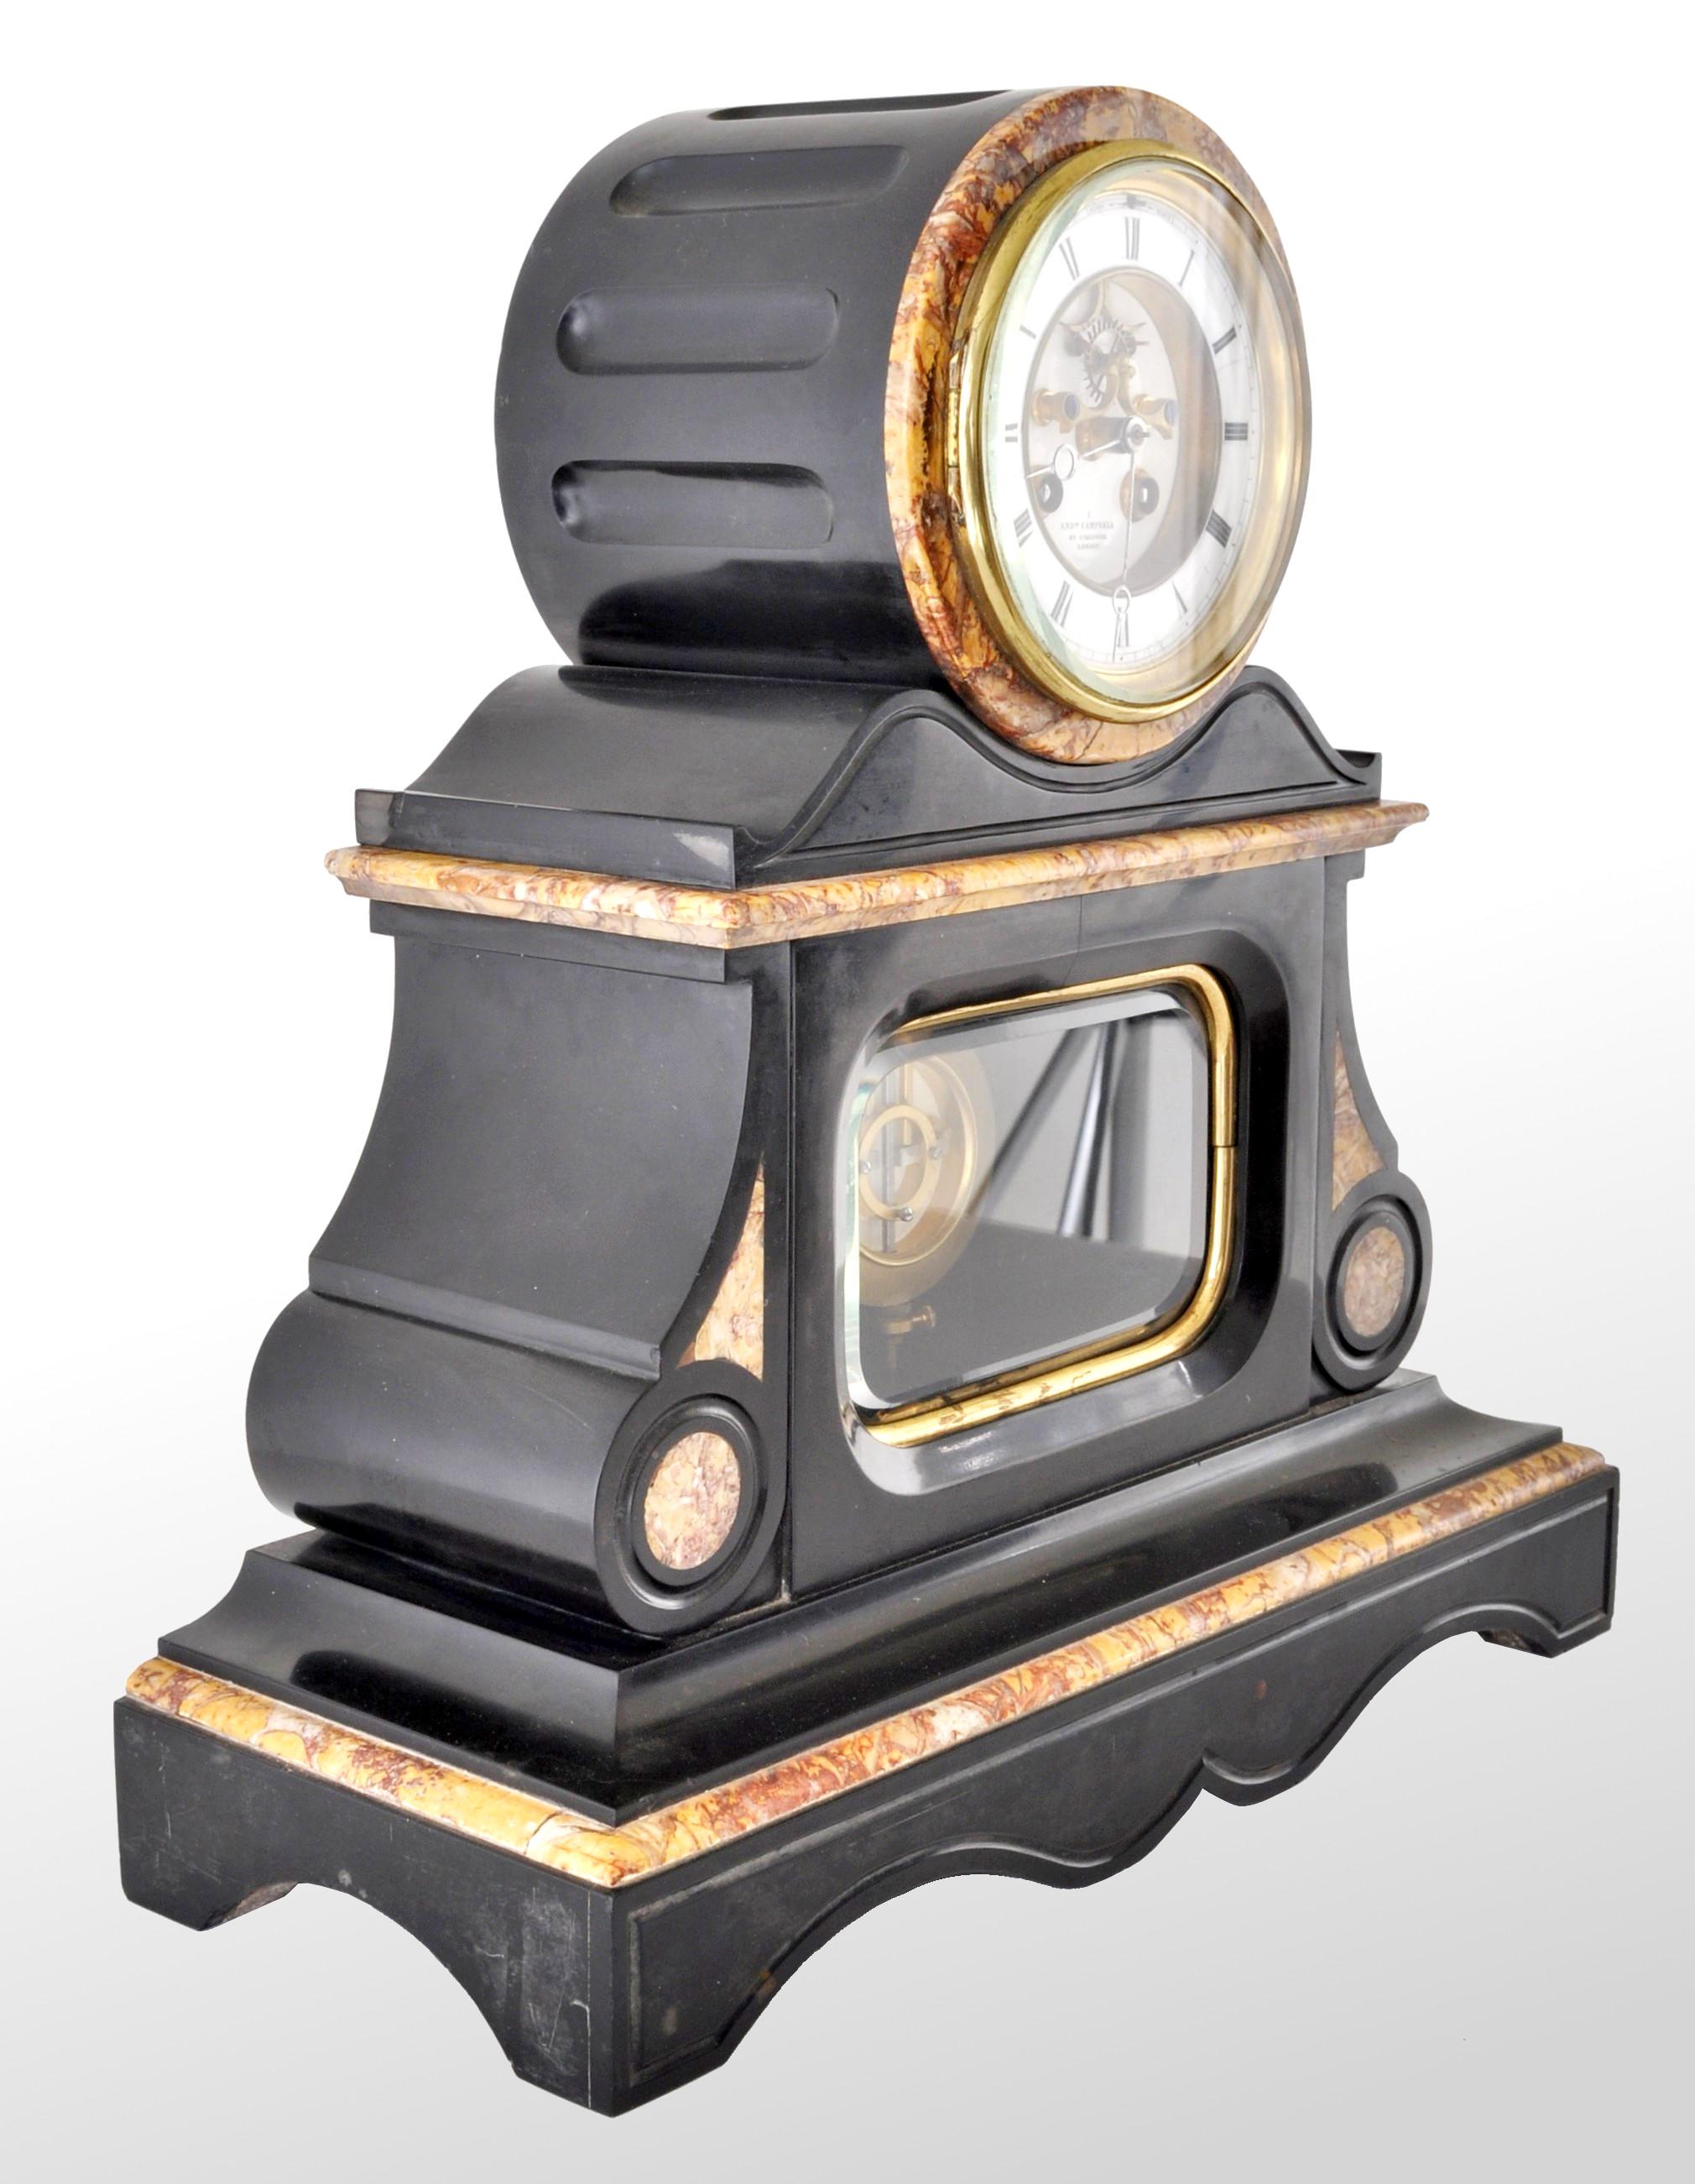 Antique 8-day marble and slate mantel clock by Henri Marc of Paris, circa 1870. A very handsome clock with variegated marble and slate case, the dial in white enamel with black Roman numerals and having an open verge escapement. The base having a